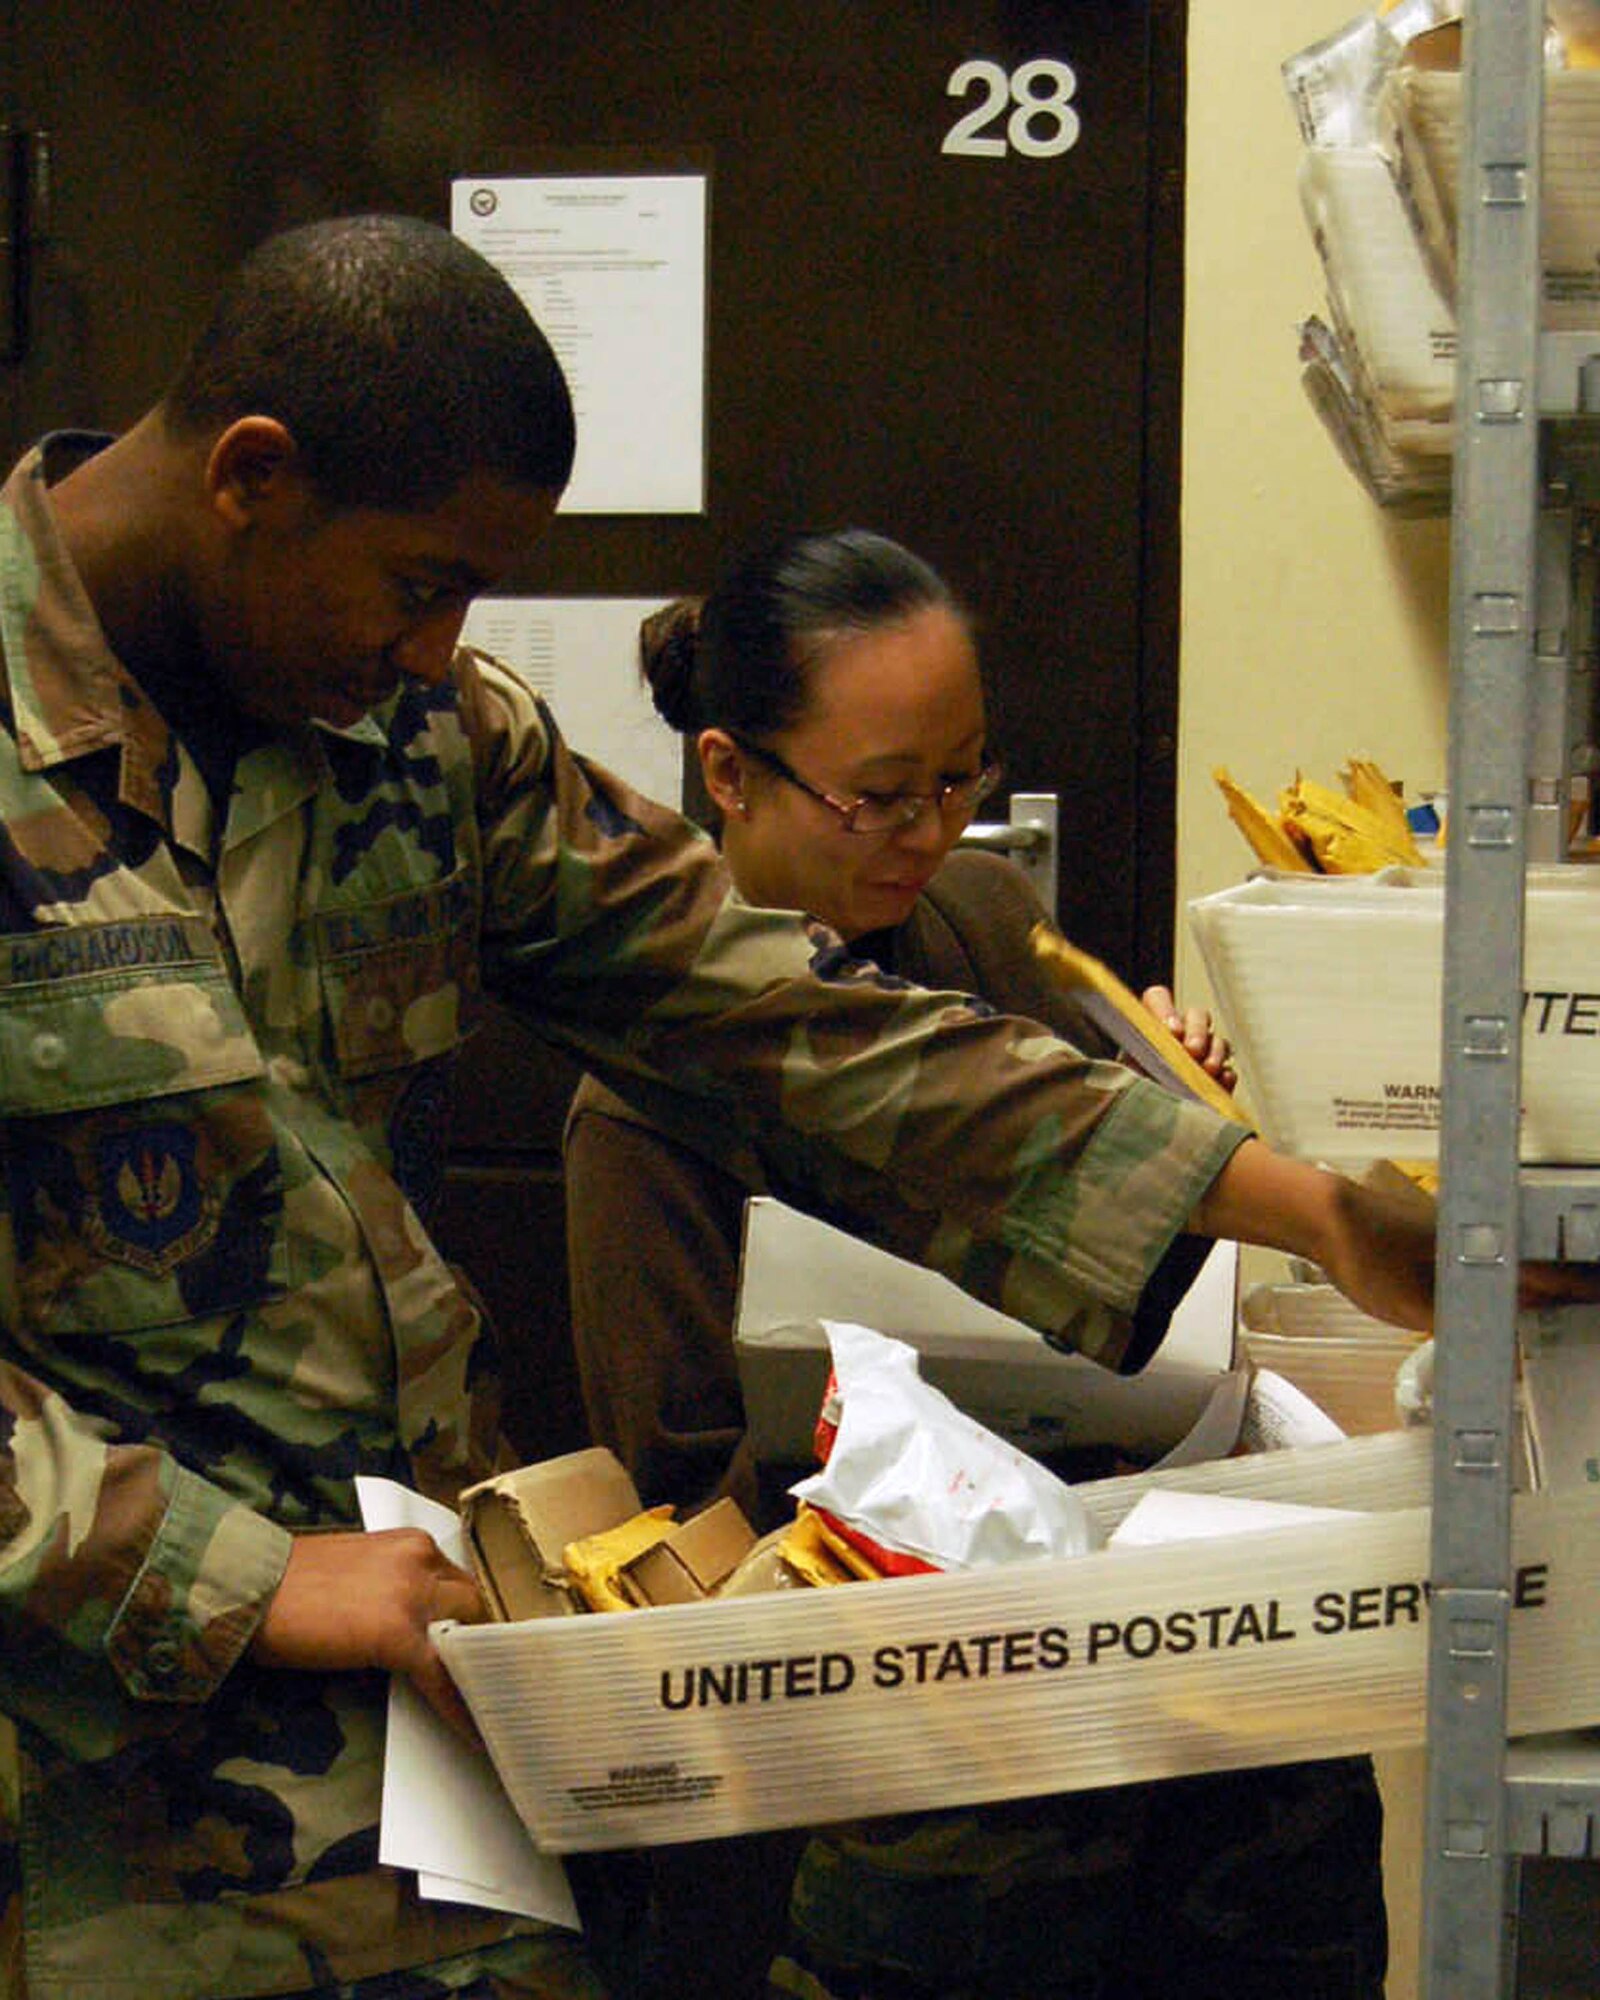 SPANGDALHEM AIR BASE, Germany – Staff Sgt. Roan Deyoung and Airman Jumund Richardson, both from the 52nd Communications Squadron post office, retrieve packages for customers. To help the postal workers from becoming overwhelmed during the holiday season, they are soliciting volunteers to assist them in shelving and distributing mail every day of the week from Dec. 12 - 30 from 9 a.m. to midnight. (U.S. Air Force photo/Staff Sgt. Tammie Moore)